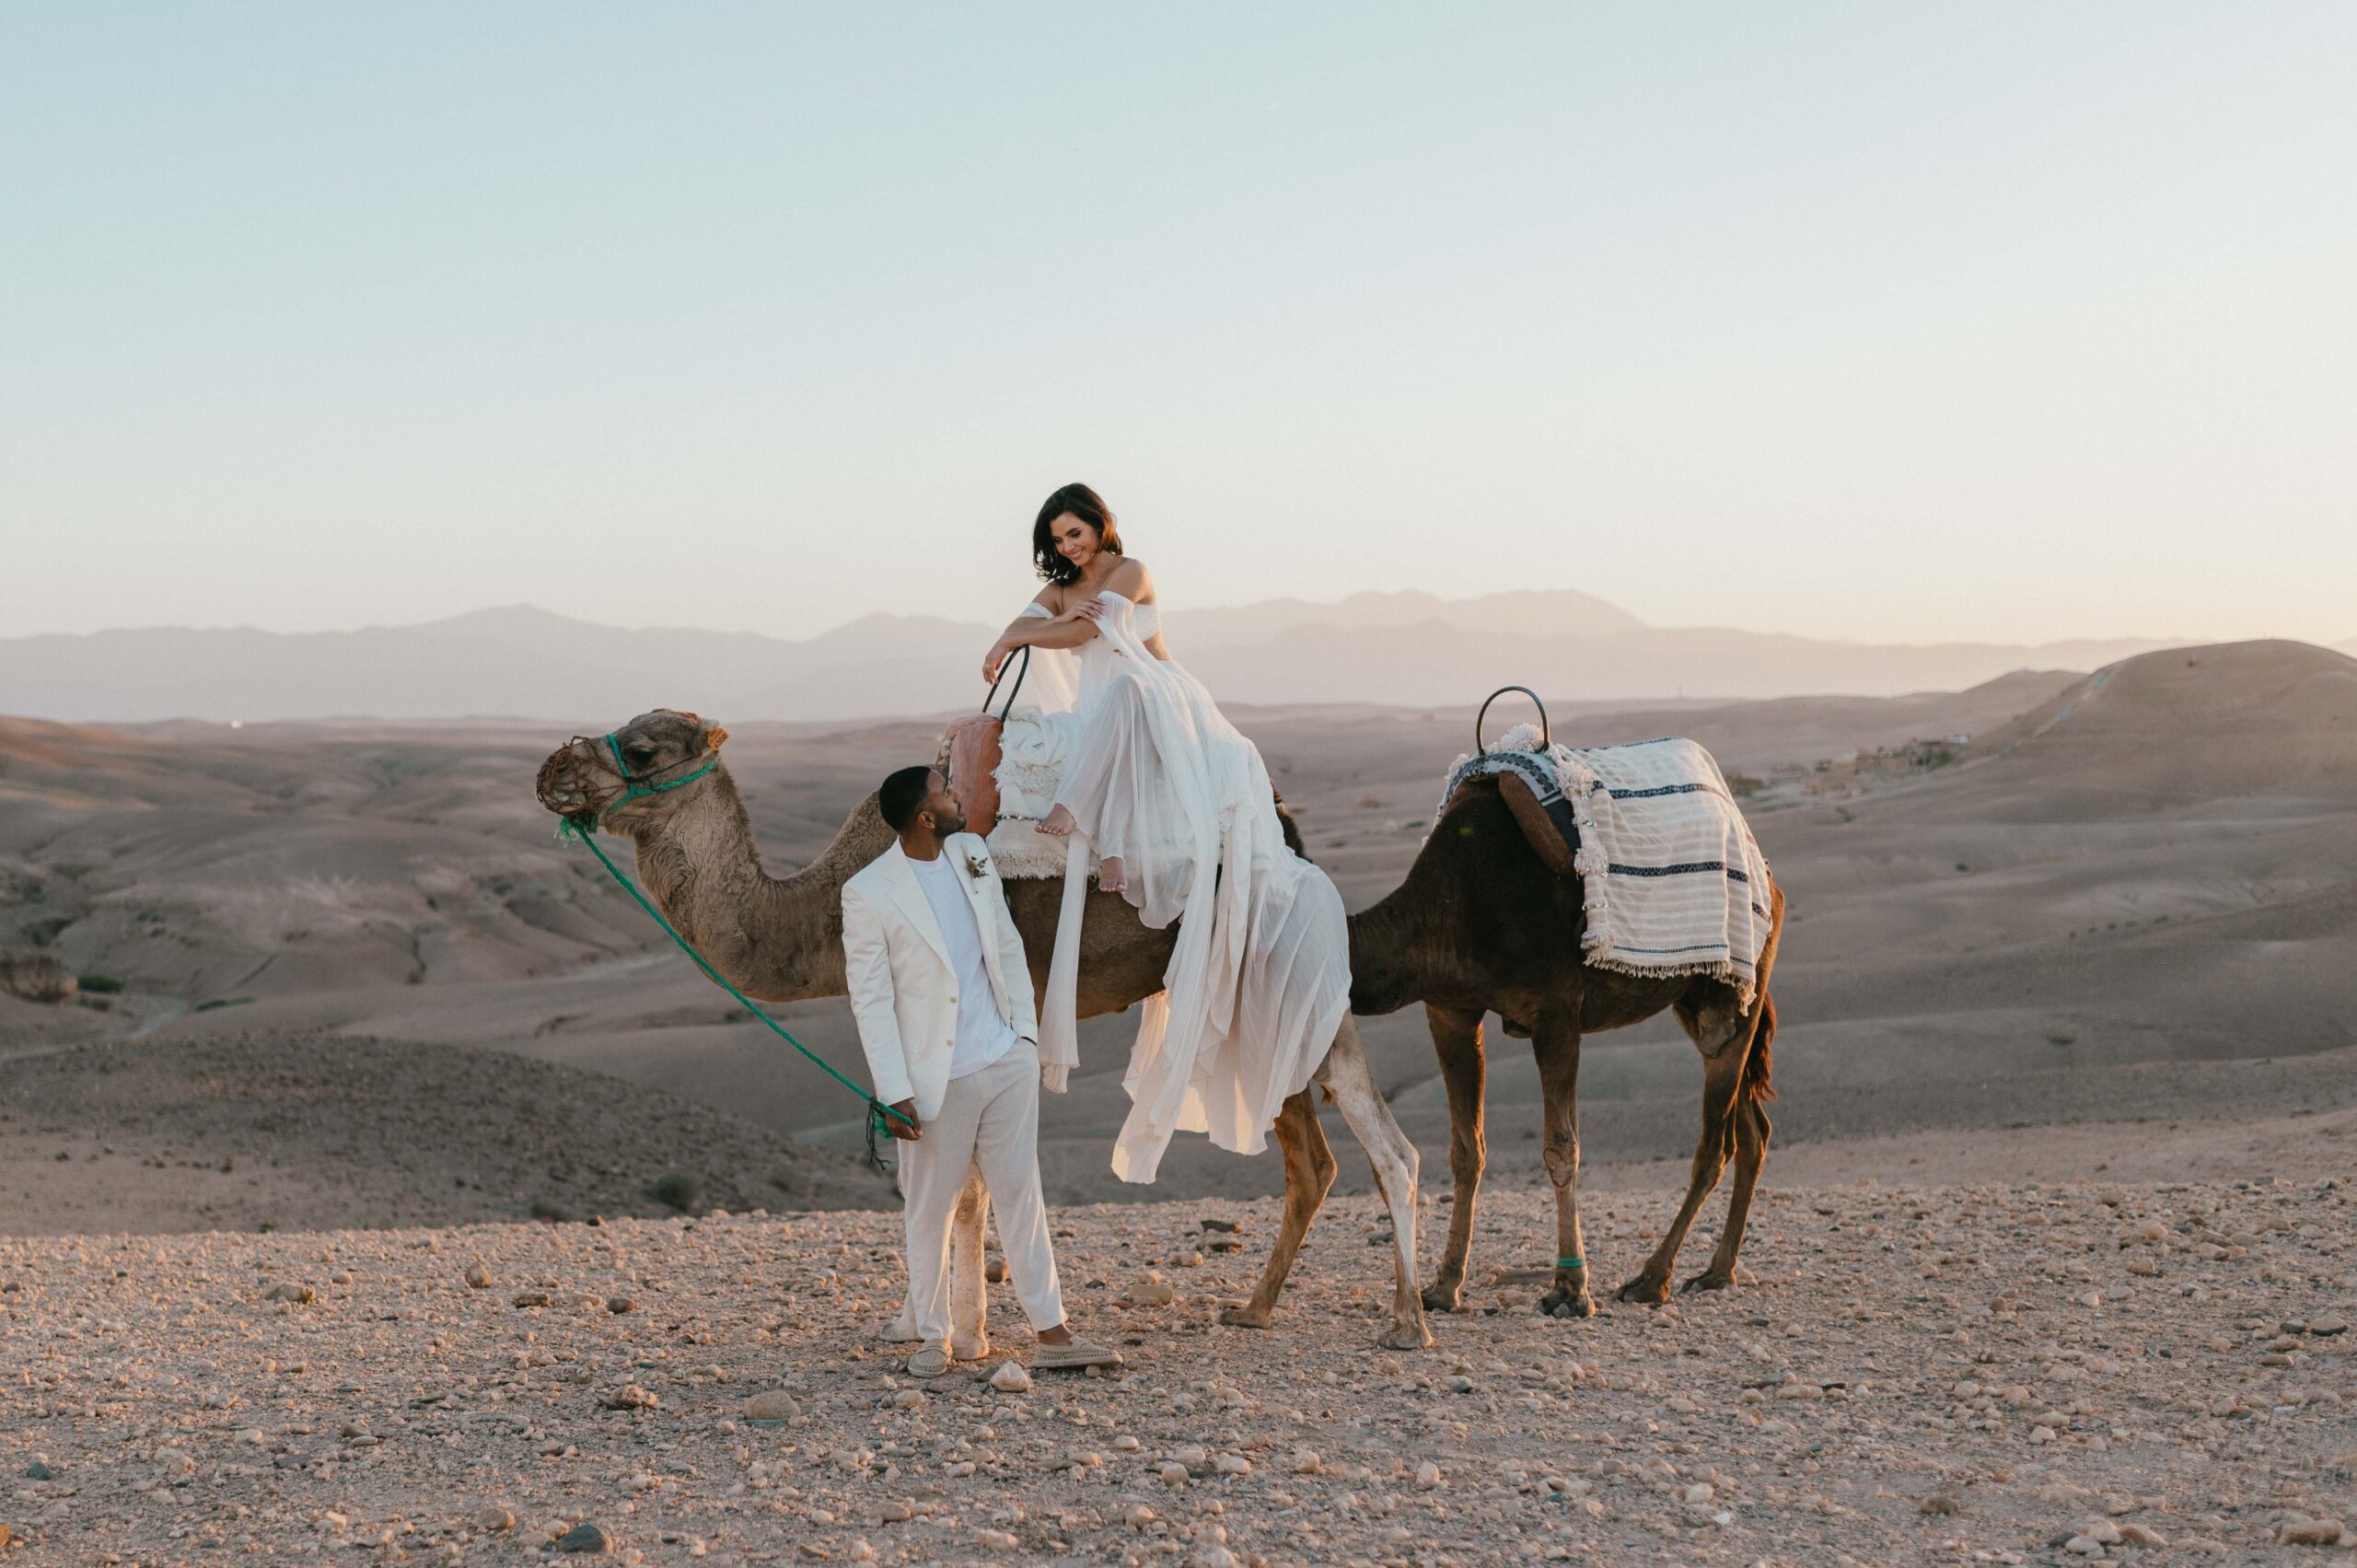 Megan and James with camels in Agafay desert Morocco after their elopement wedding.